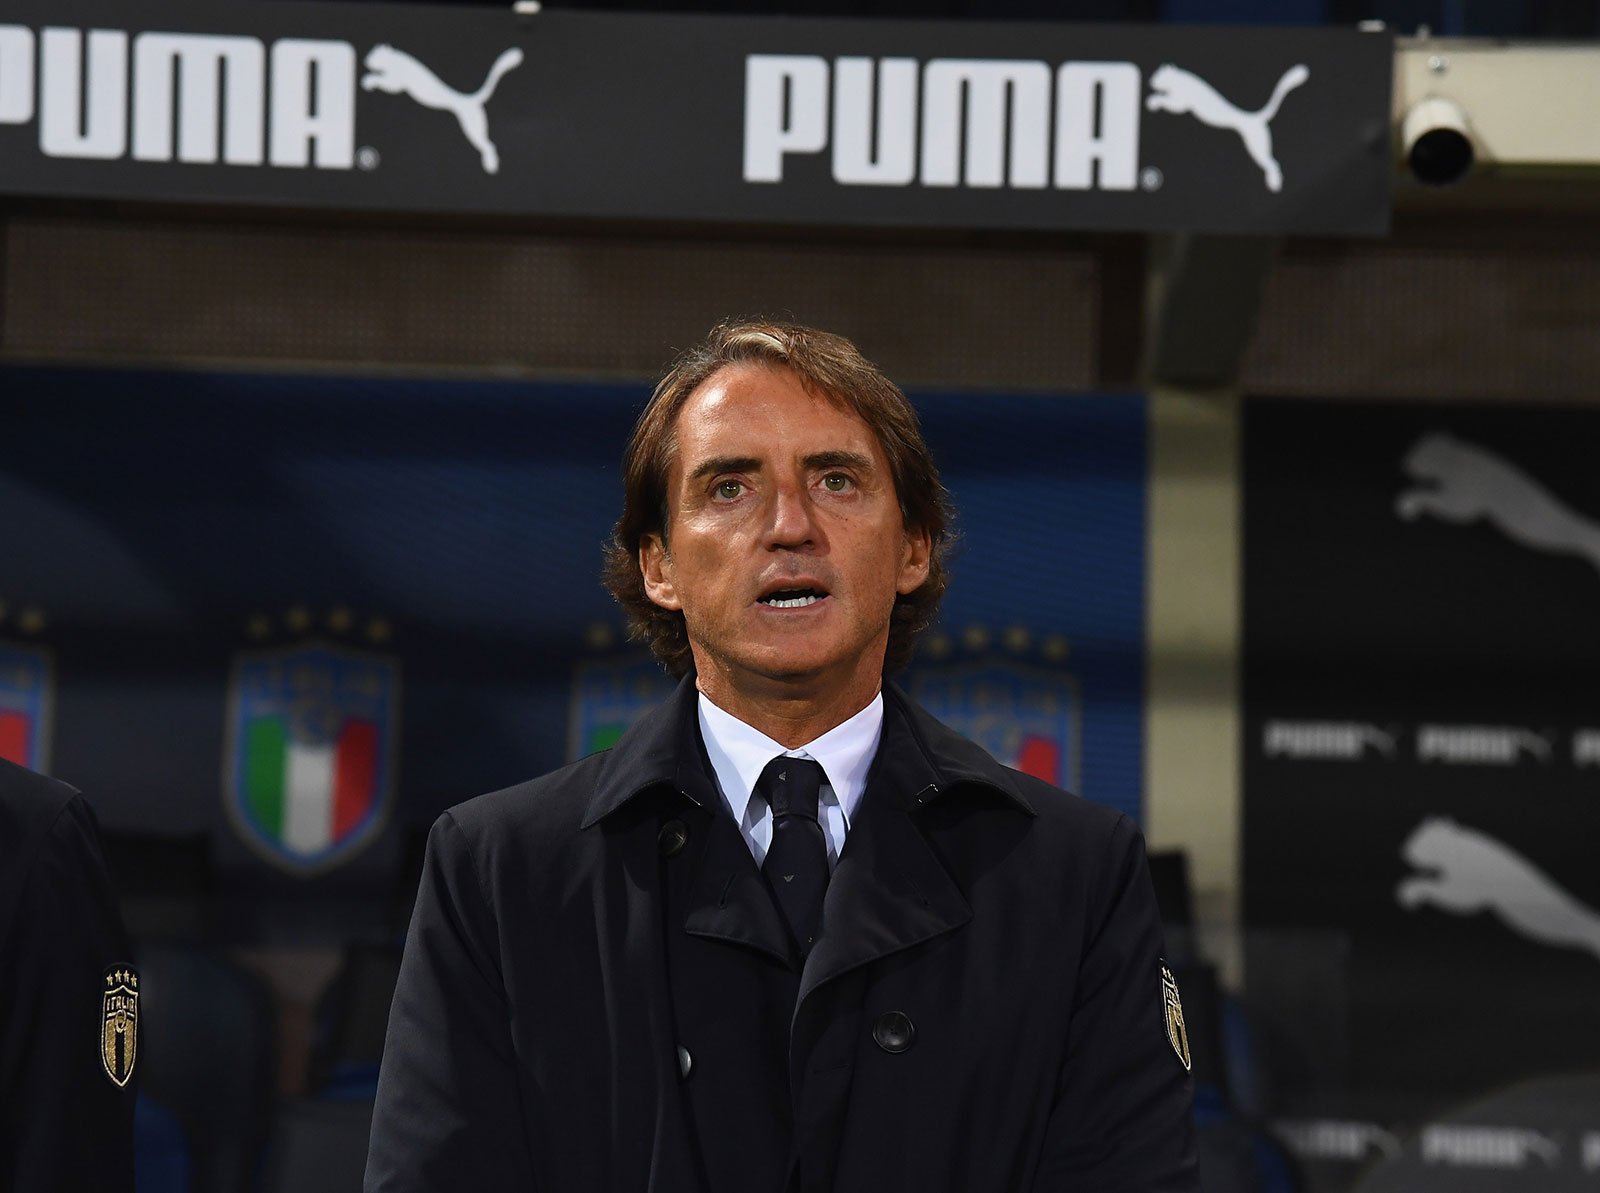 As it was reported right after his resignation from Italy, Roberto Mancini is close to accepting a wealthy proposal to take over Saudi Arabia.